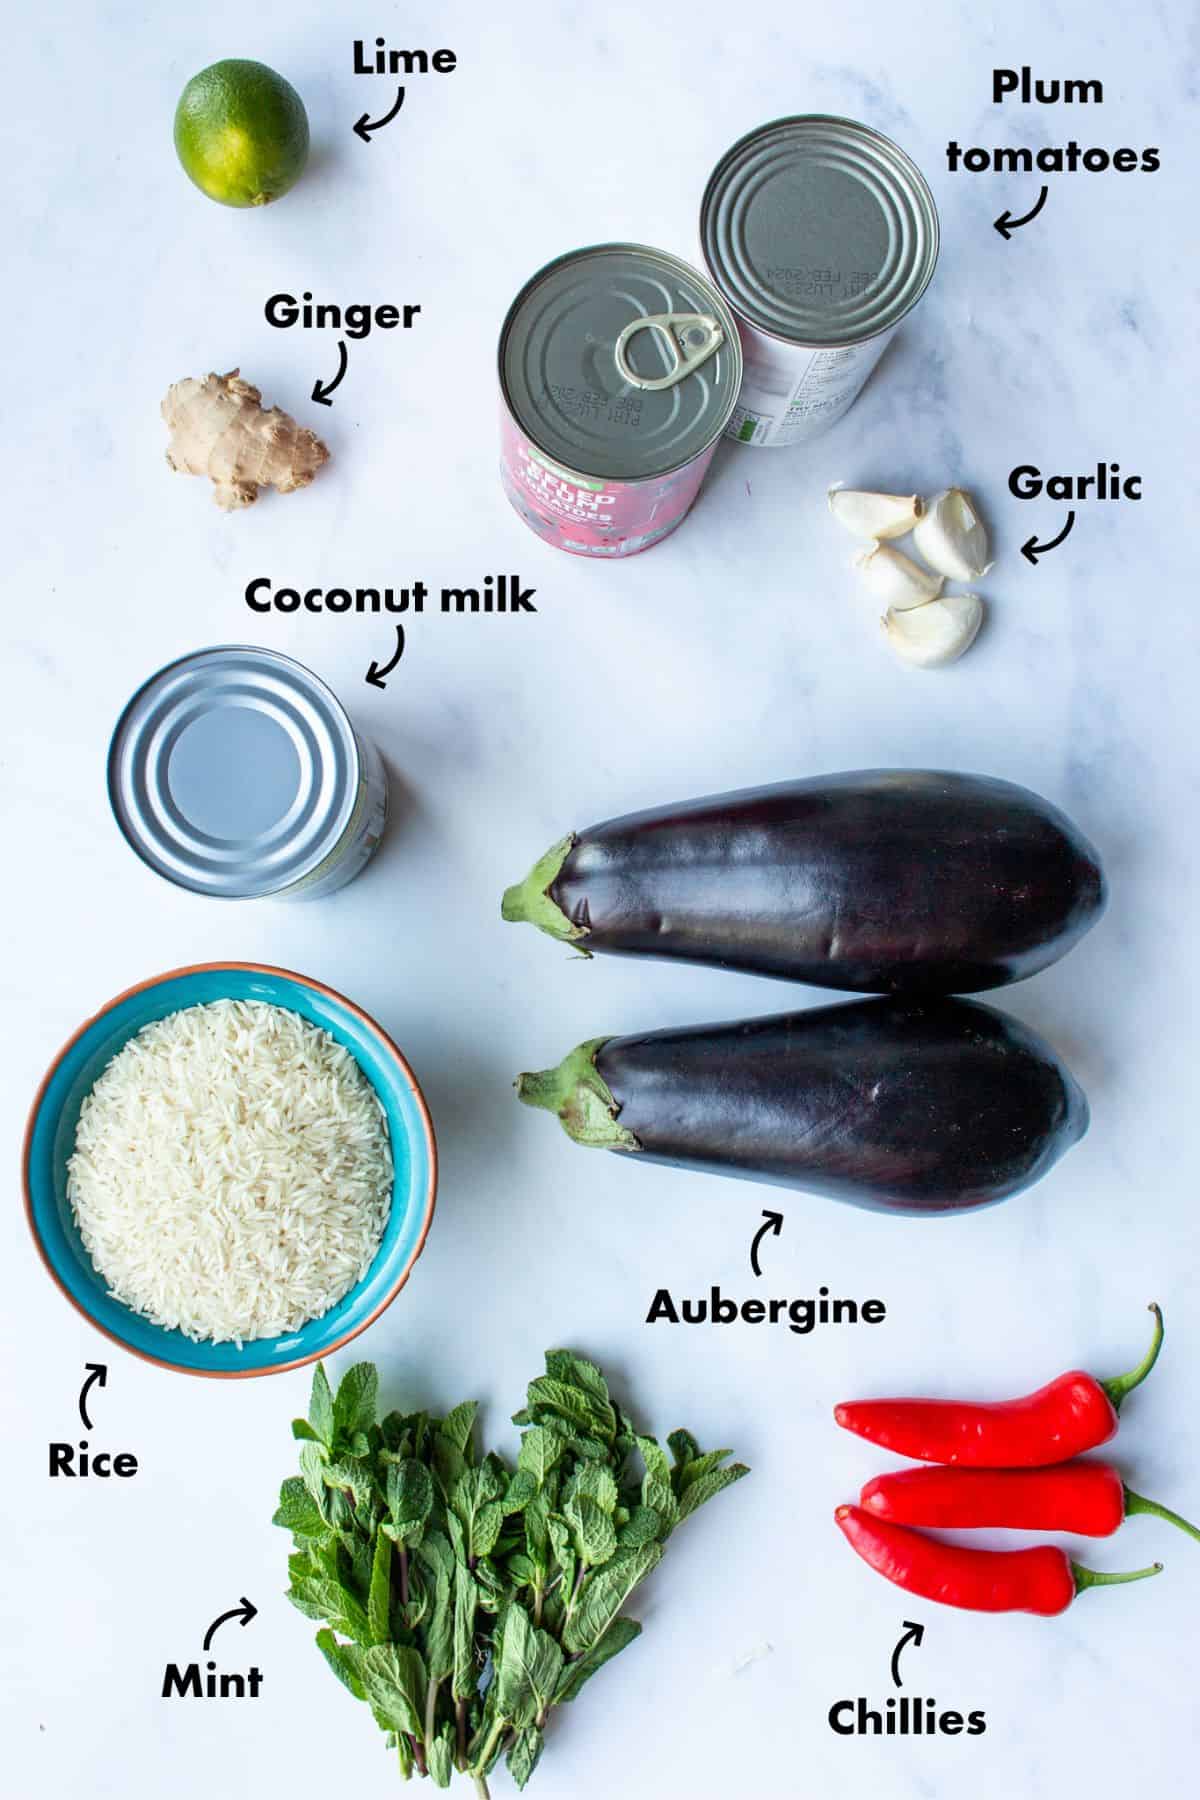 Ingredients to make aubergine curry laid out on a blue background and labelled.